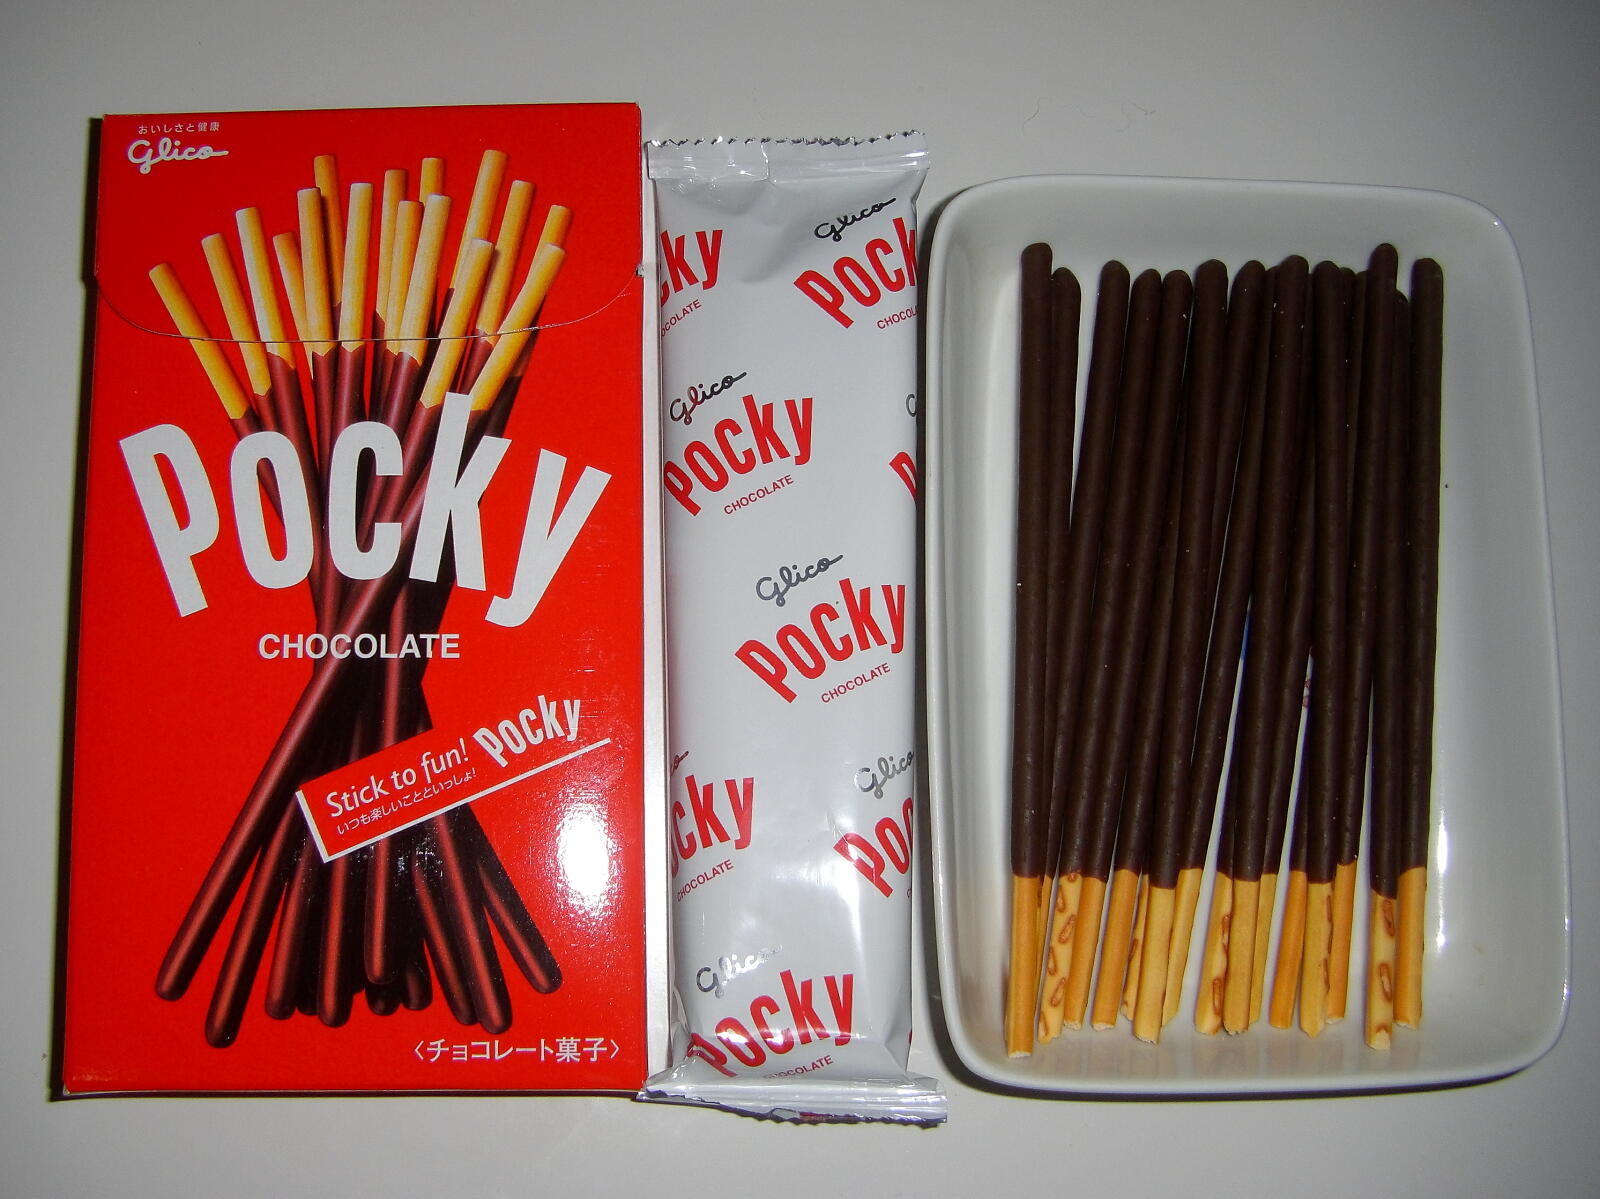 Pocky | We Are What We Eat Wiki | FANDOM powered by Wikia